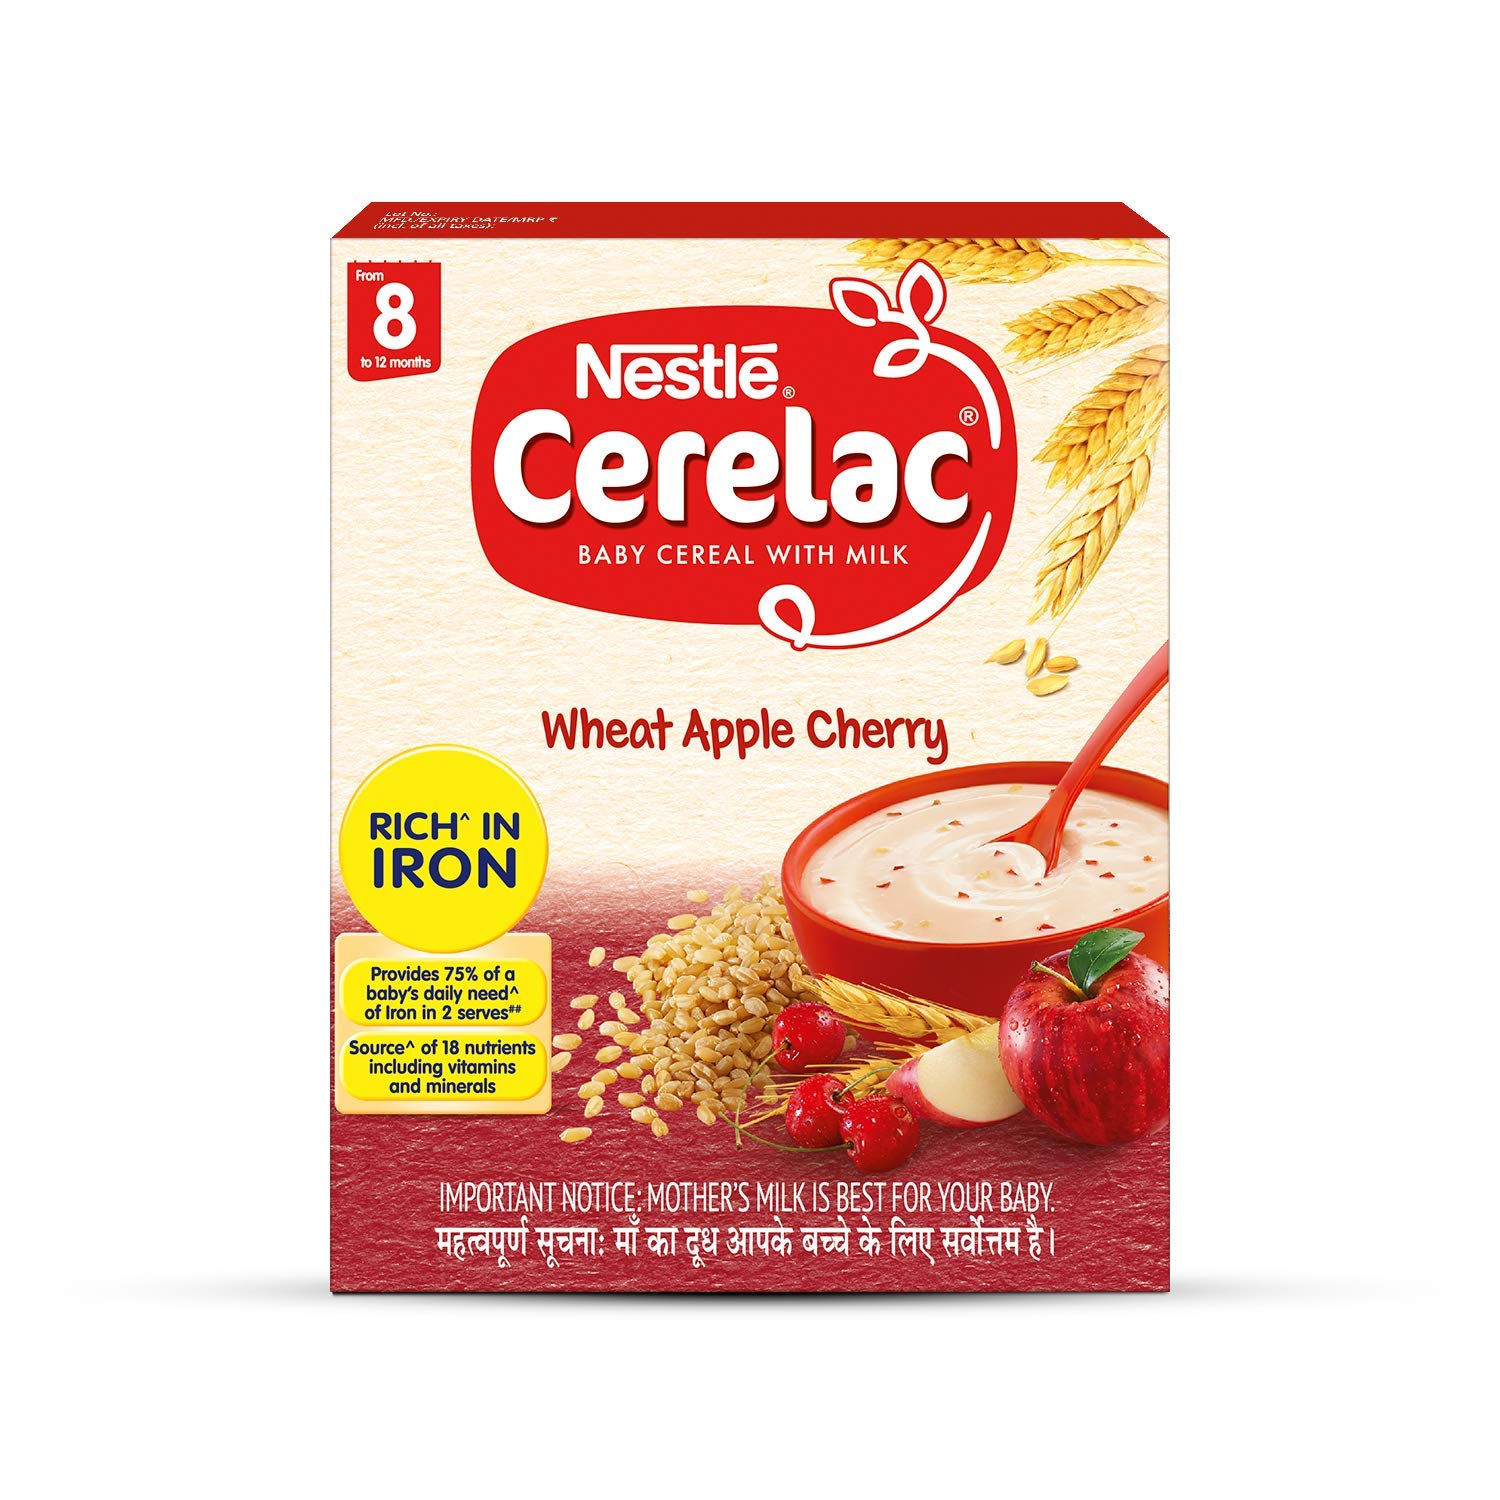 NestlÃ© CERELAC Baby Cereal with Milk, Wheat Apple Cherry â€“ From 8 Months, 300g BIB Pack